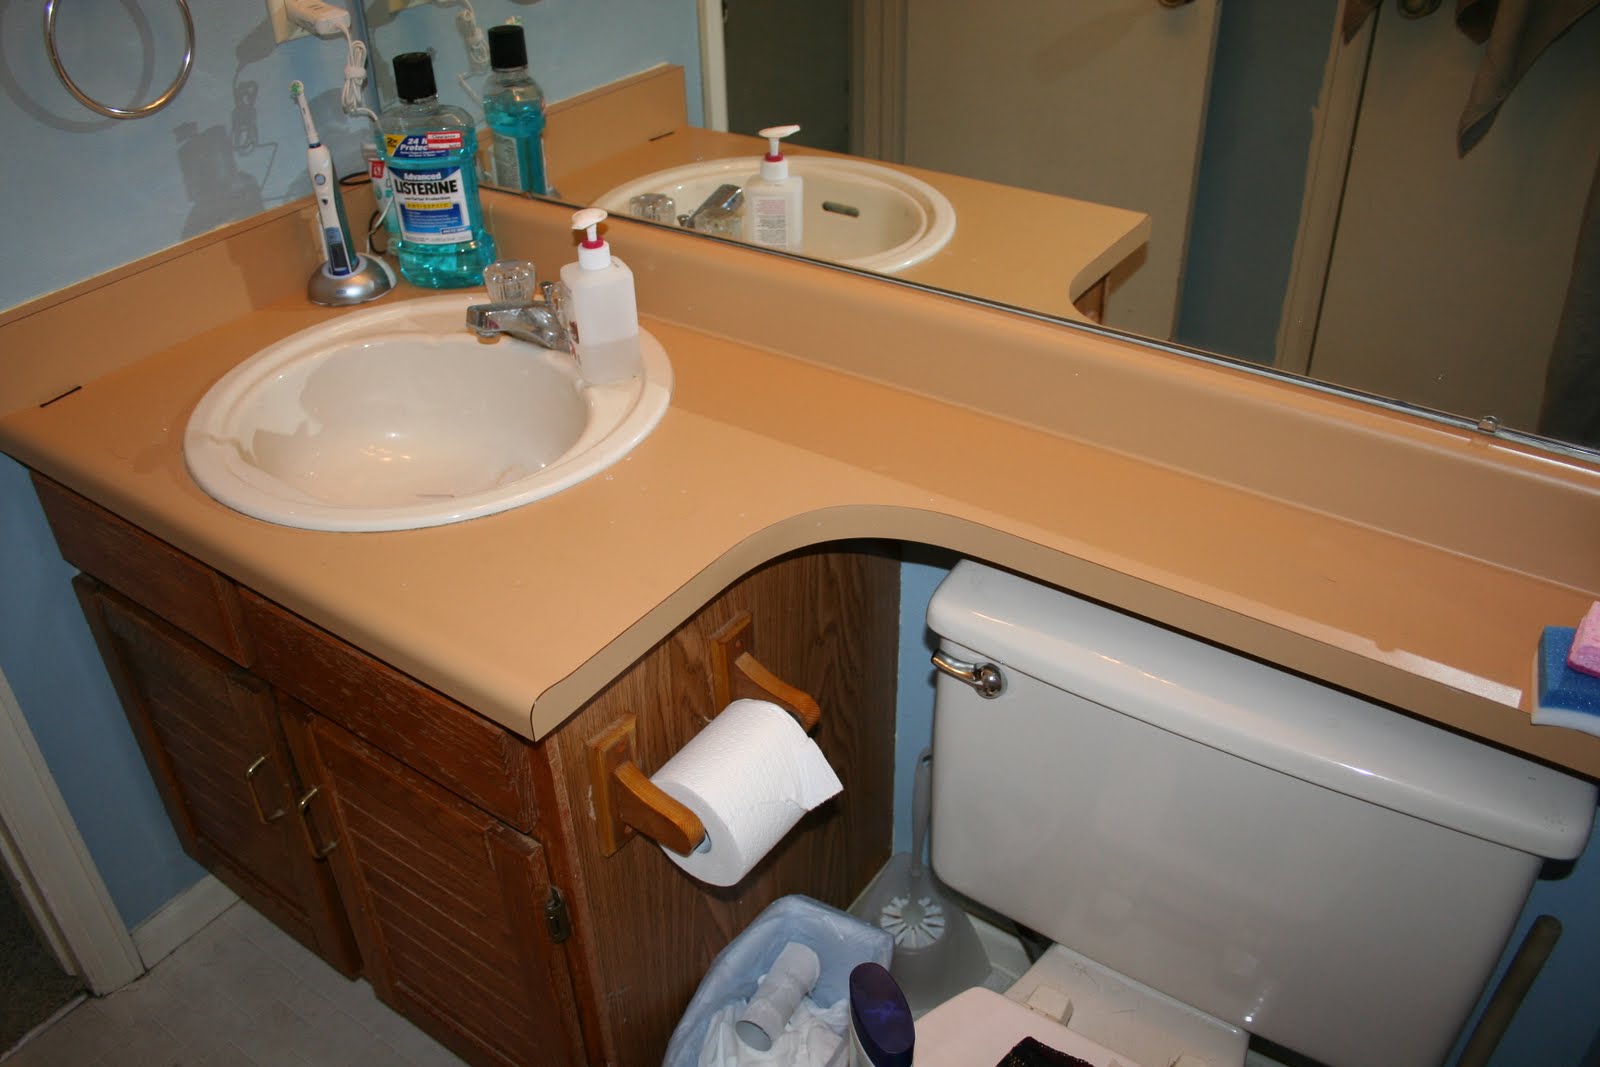 remodeling small bathrooms can now cut right through copper pipe and/or saw off a door frame 